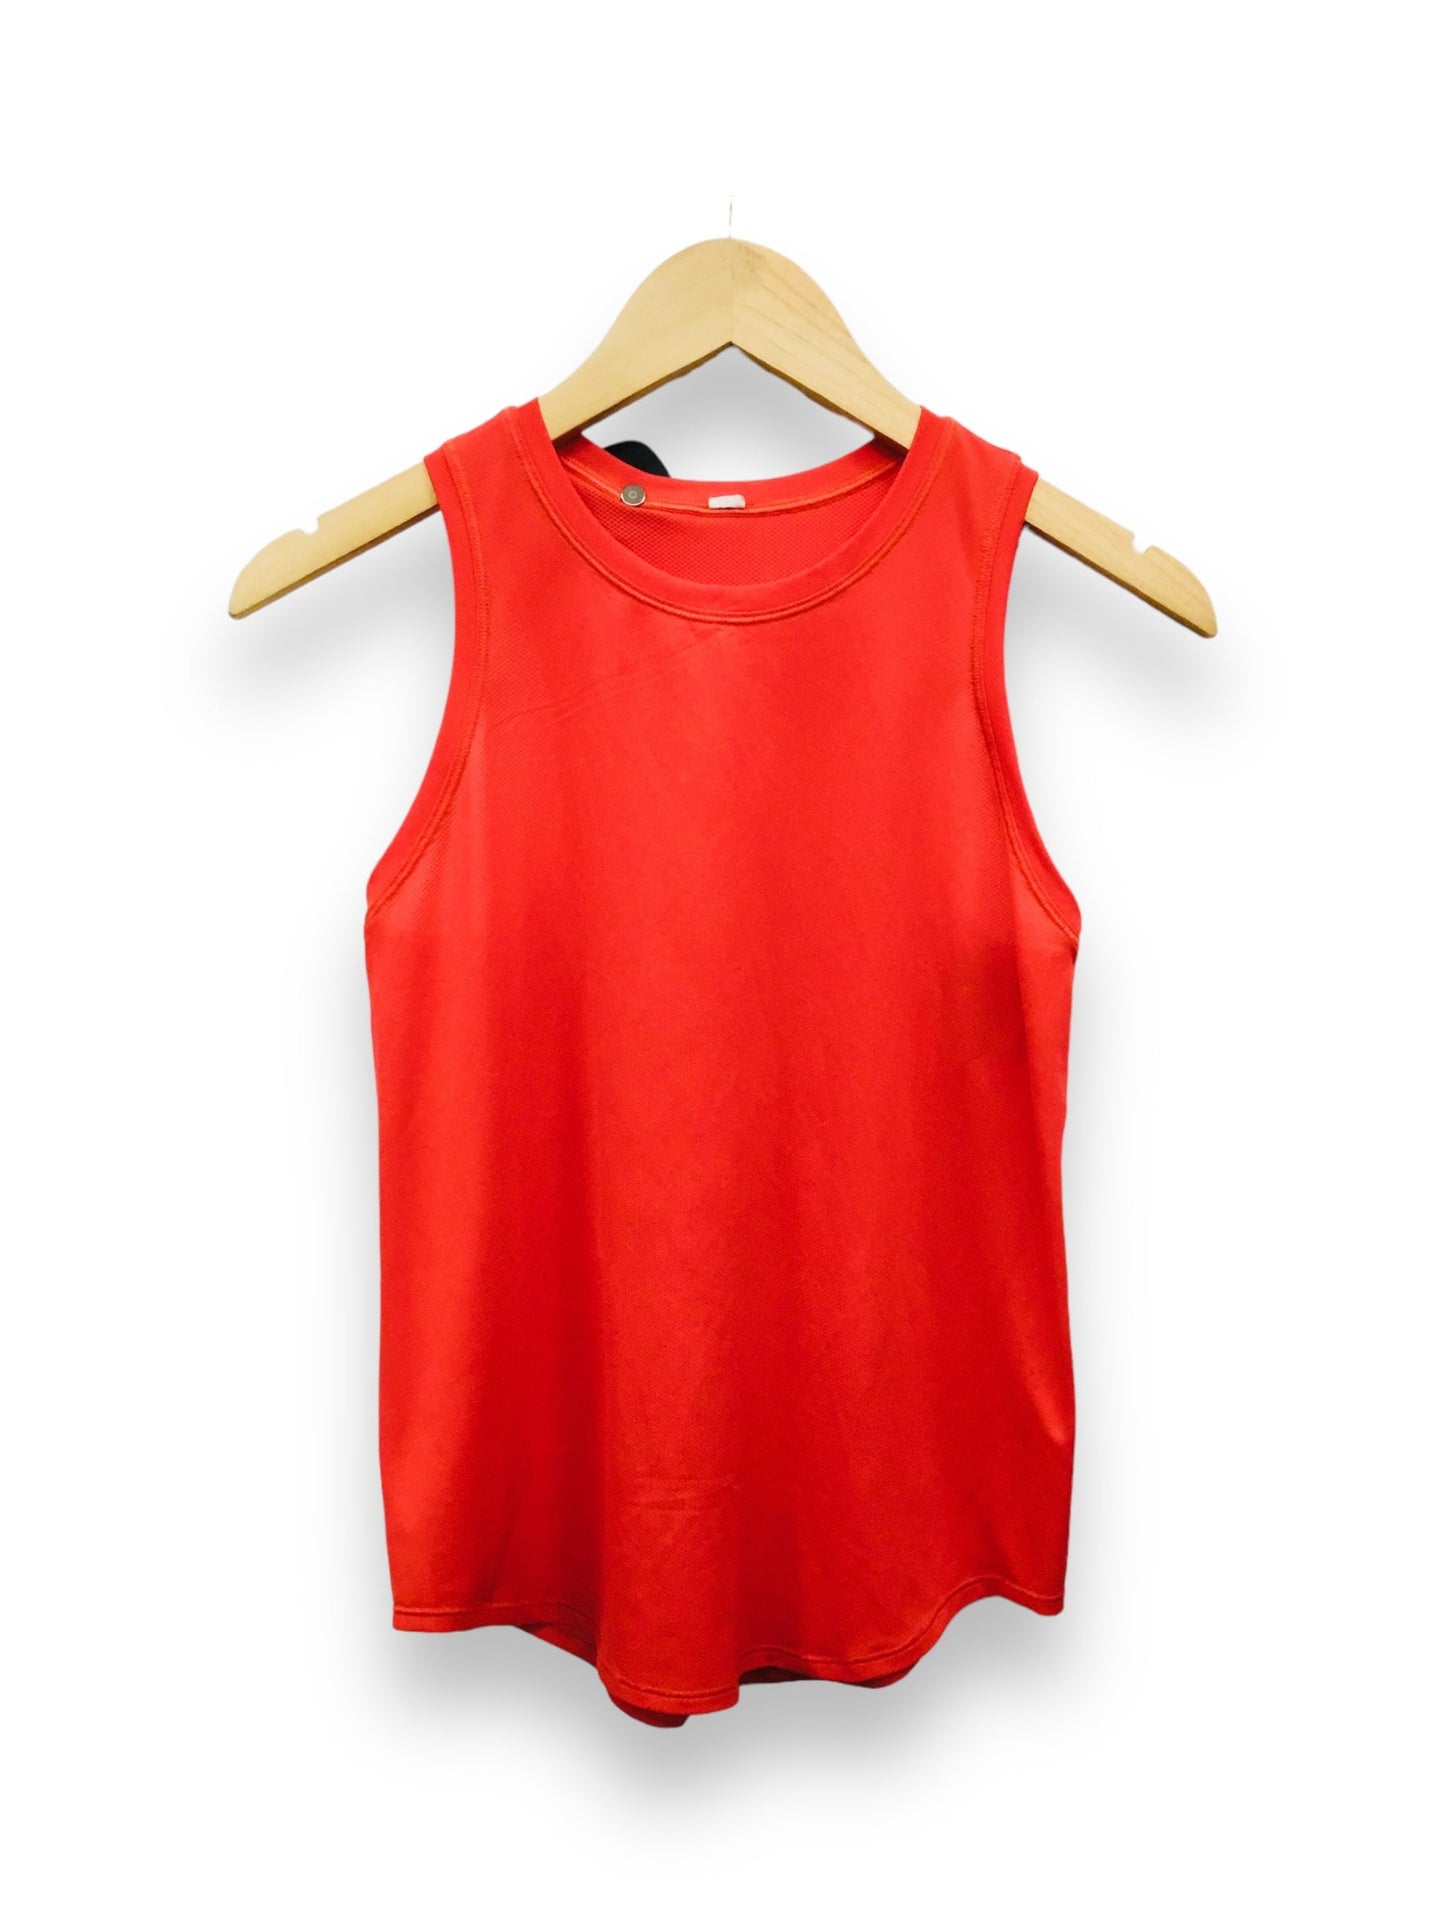 Red Mesh Athletic Tank Top Lululemon, Size 6